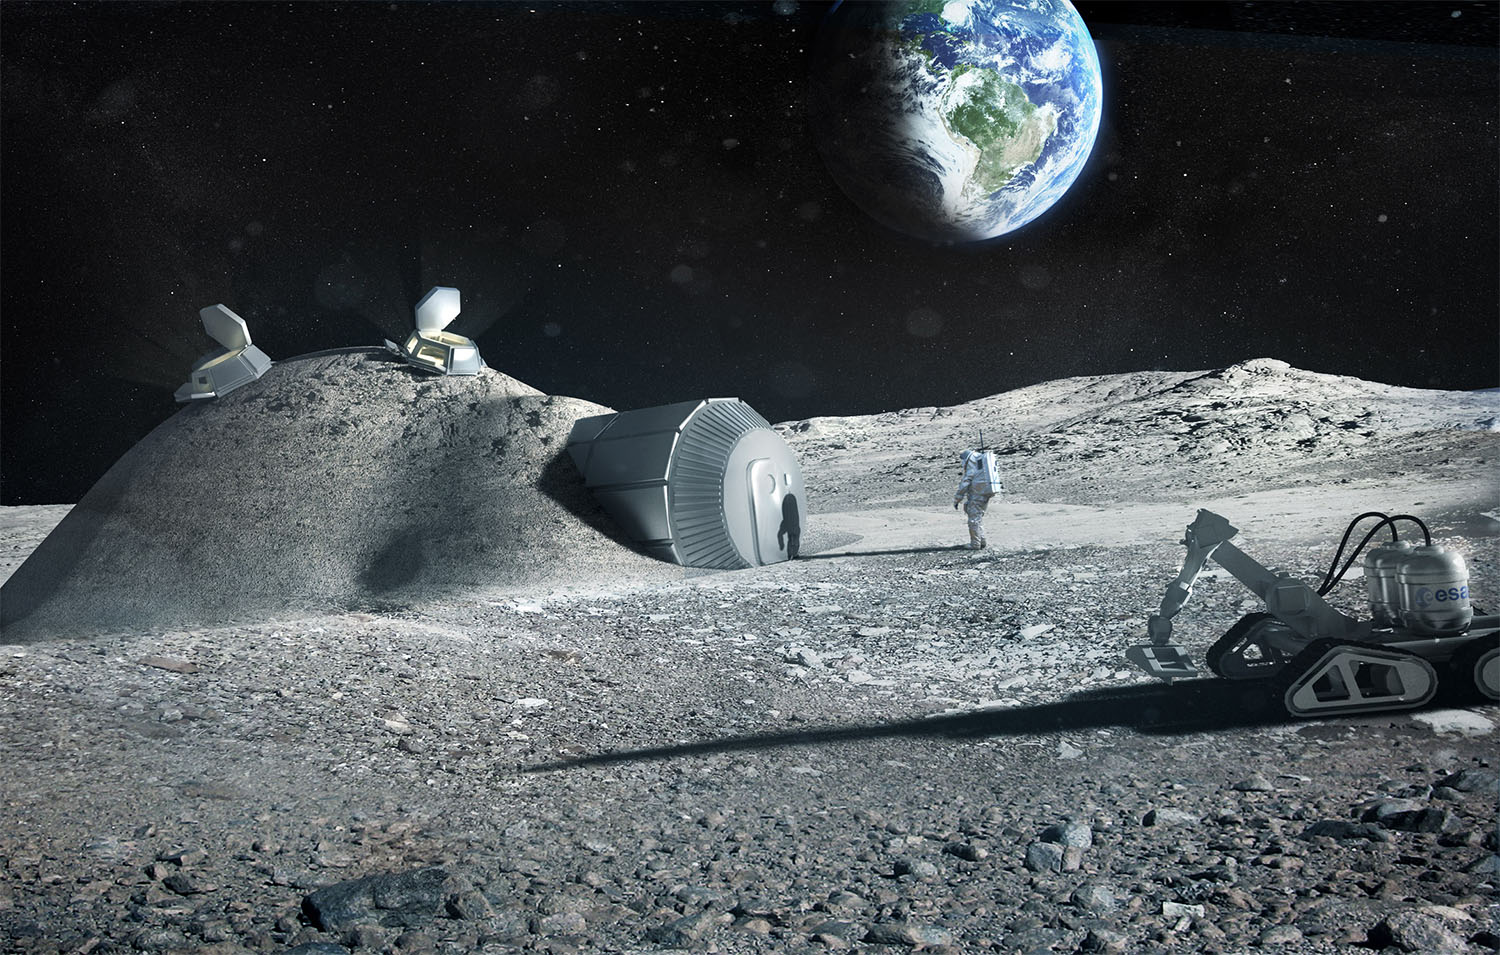 20 interesting facts about Moon